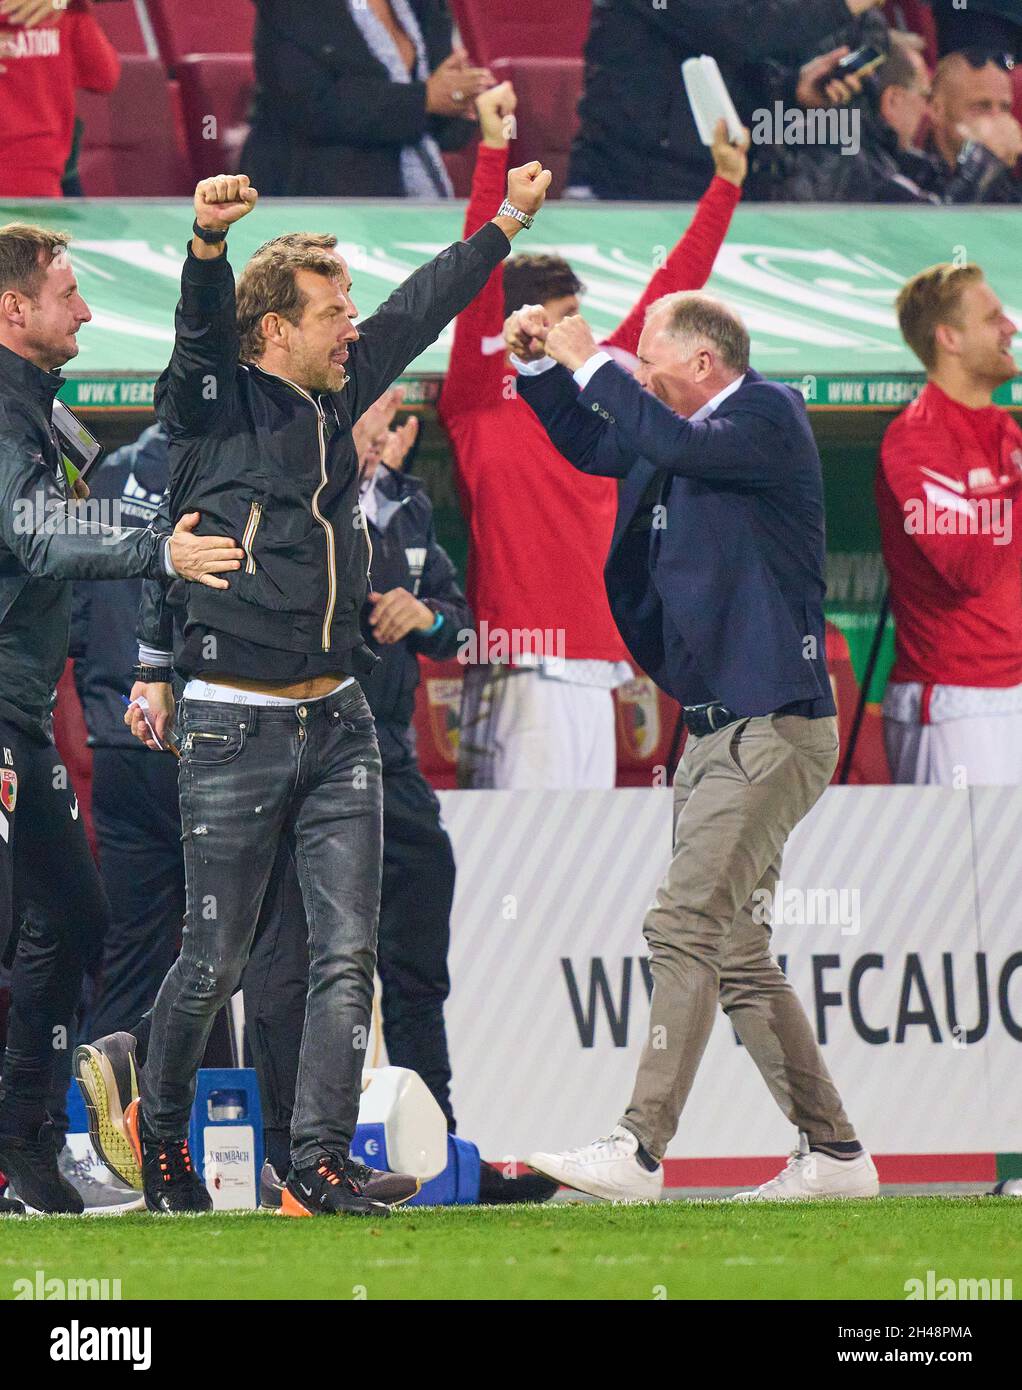 Augsburg, Germany. 31st Oct, 2021. Markus Weinzierl, FCA coach, team manager, Stefan REUTER, Manager FCA celebrate 4-1 goal of Alfred FINNBOGASON, FCA 27, happy, laugh, celebration, in the match FC AUGSBURG - VFB STUTTGART 4-1 1.German Football League on October 31, 2021 in Augsburg, Germany. Season 2021/2022, matchday 10, 1.Bundesliga, 10.Spieltag. Credit: Peter Schatz/Alamy Live News Stock Photo